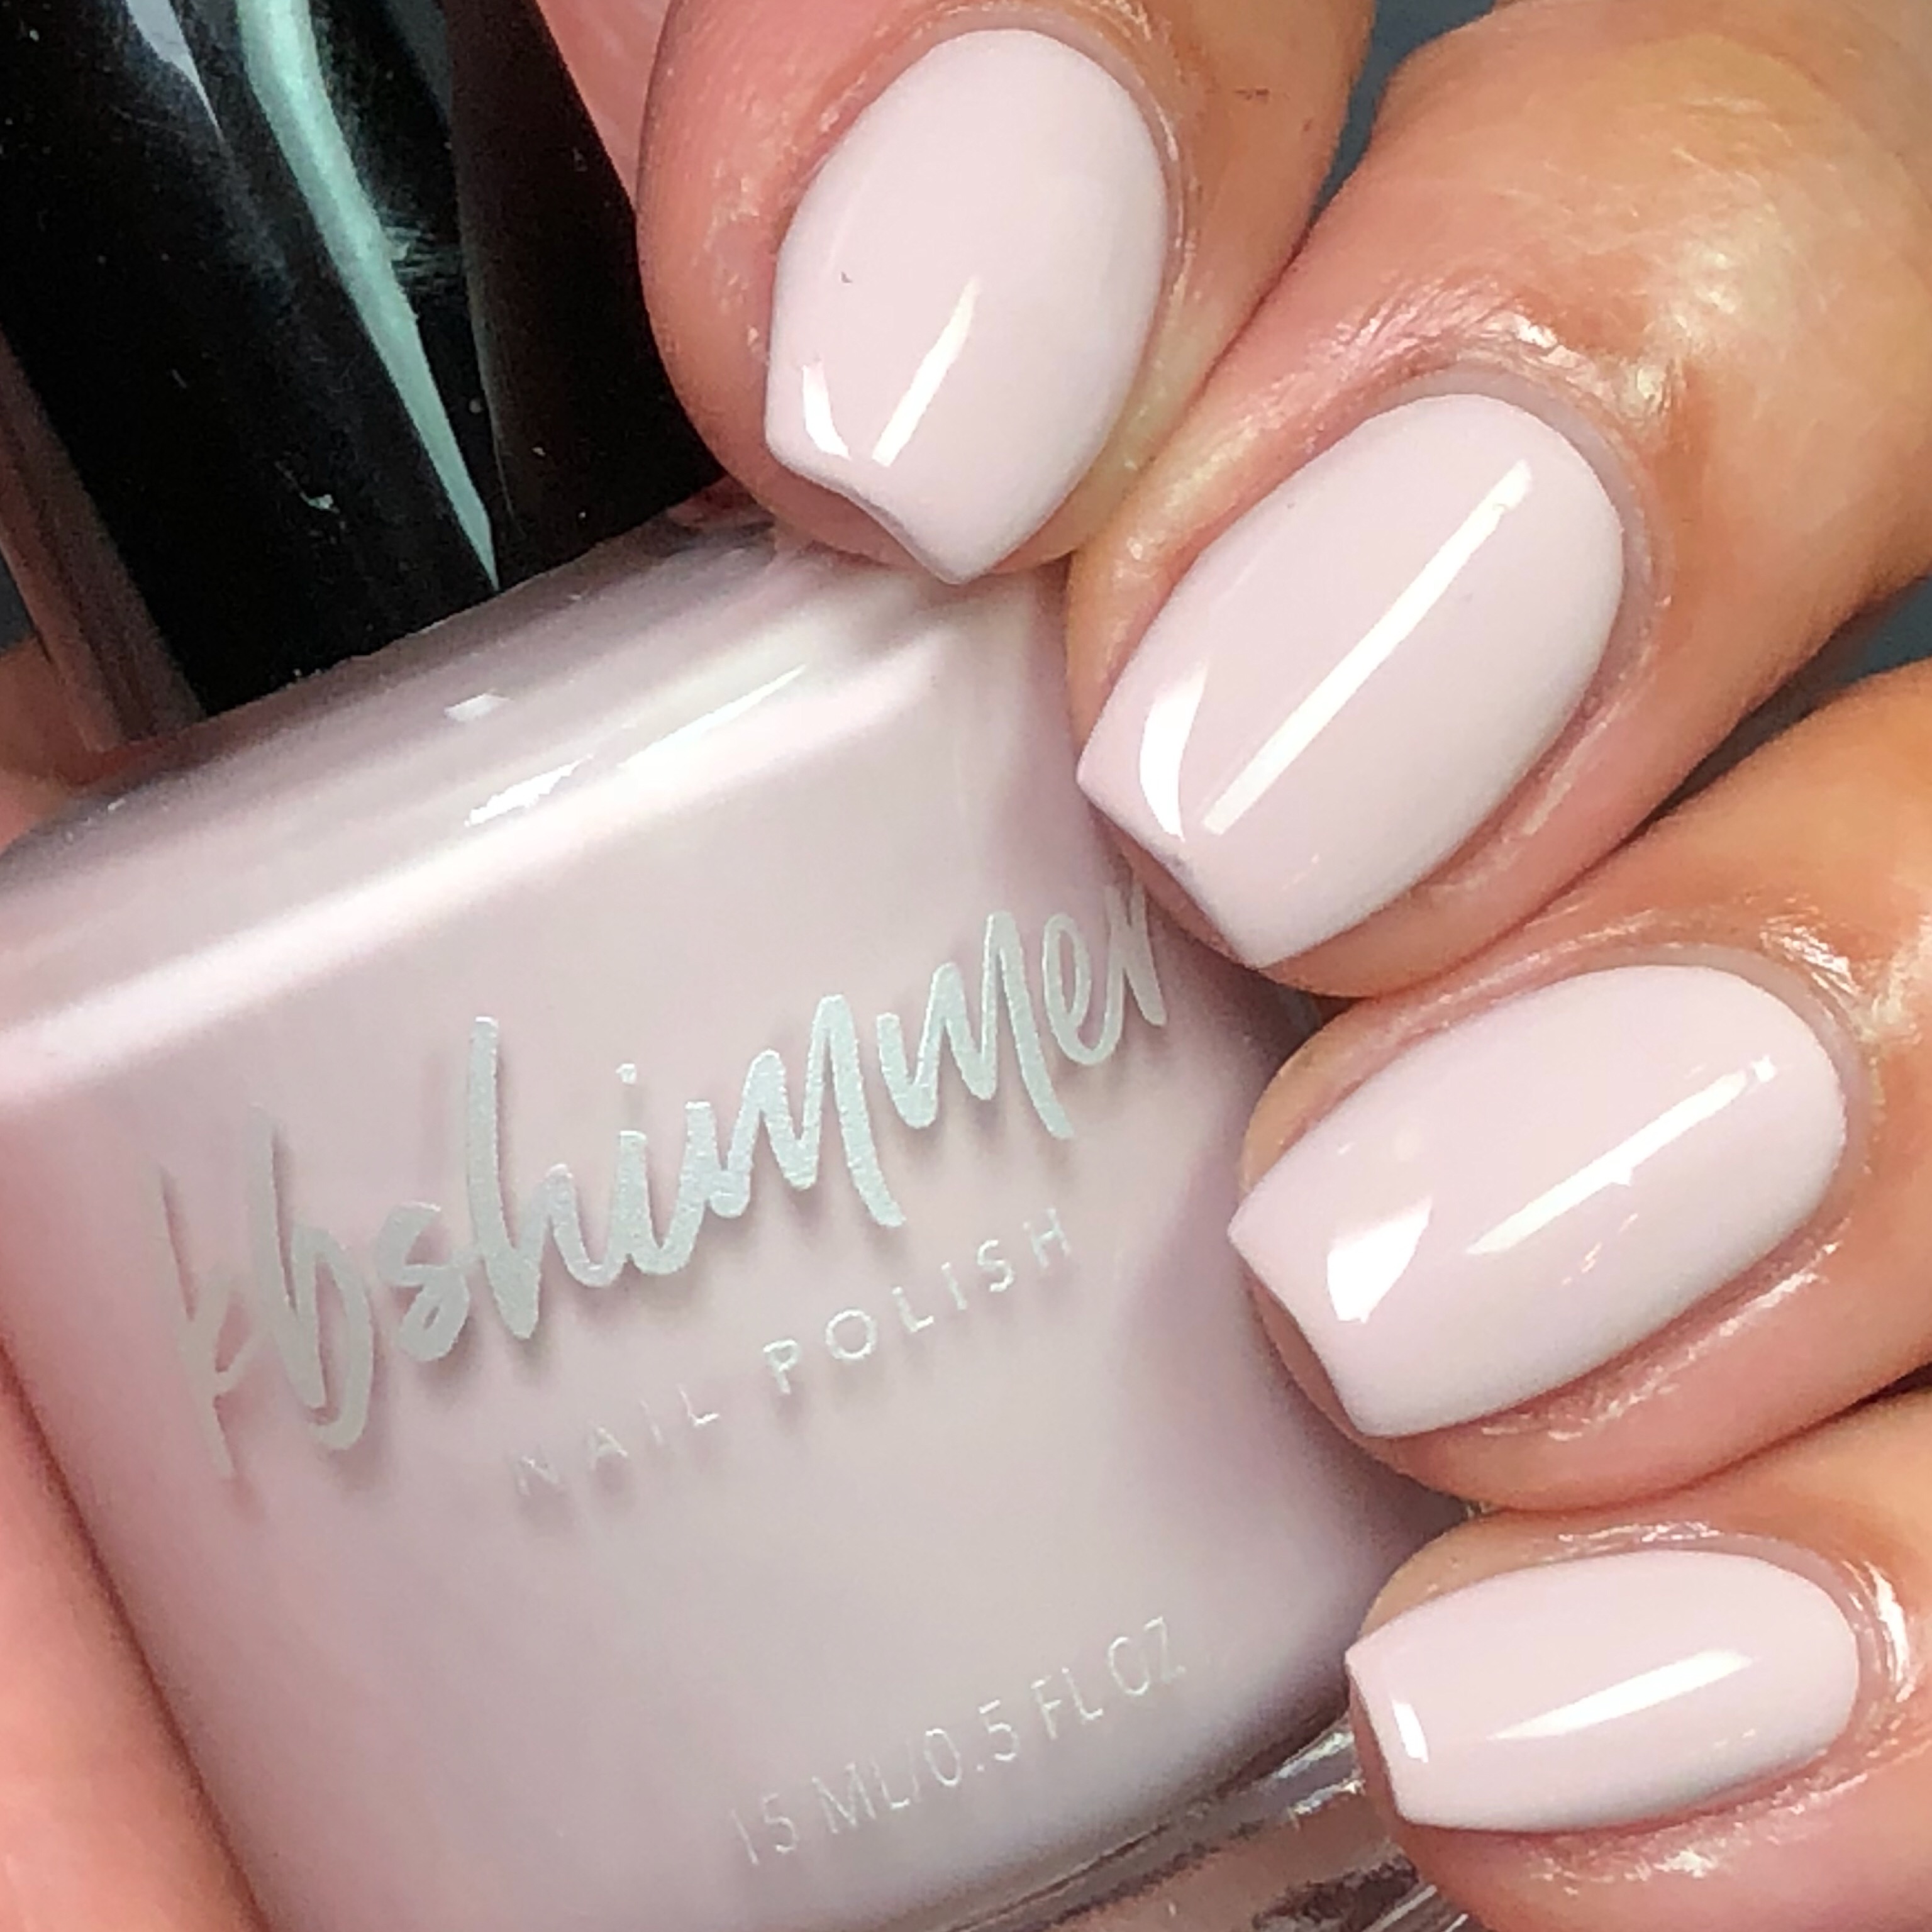 What nail color goes with cream?